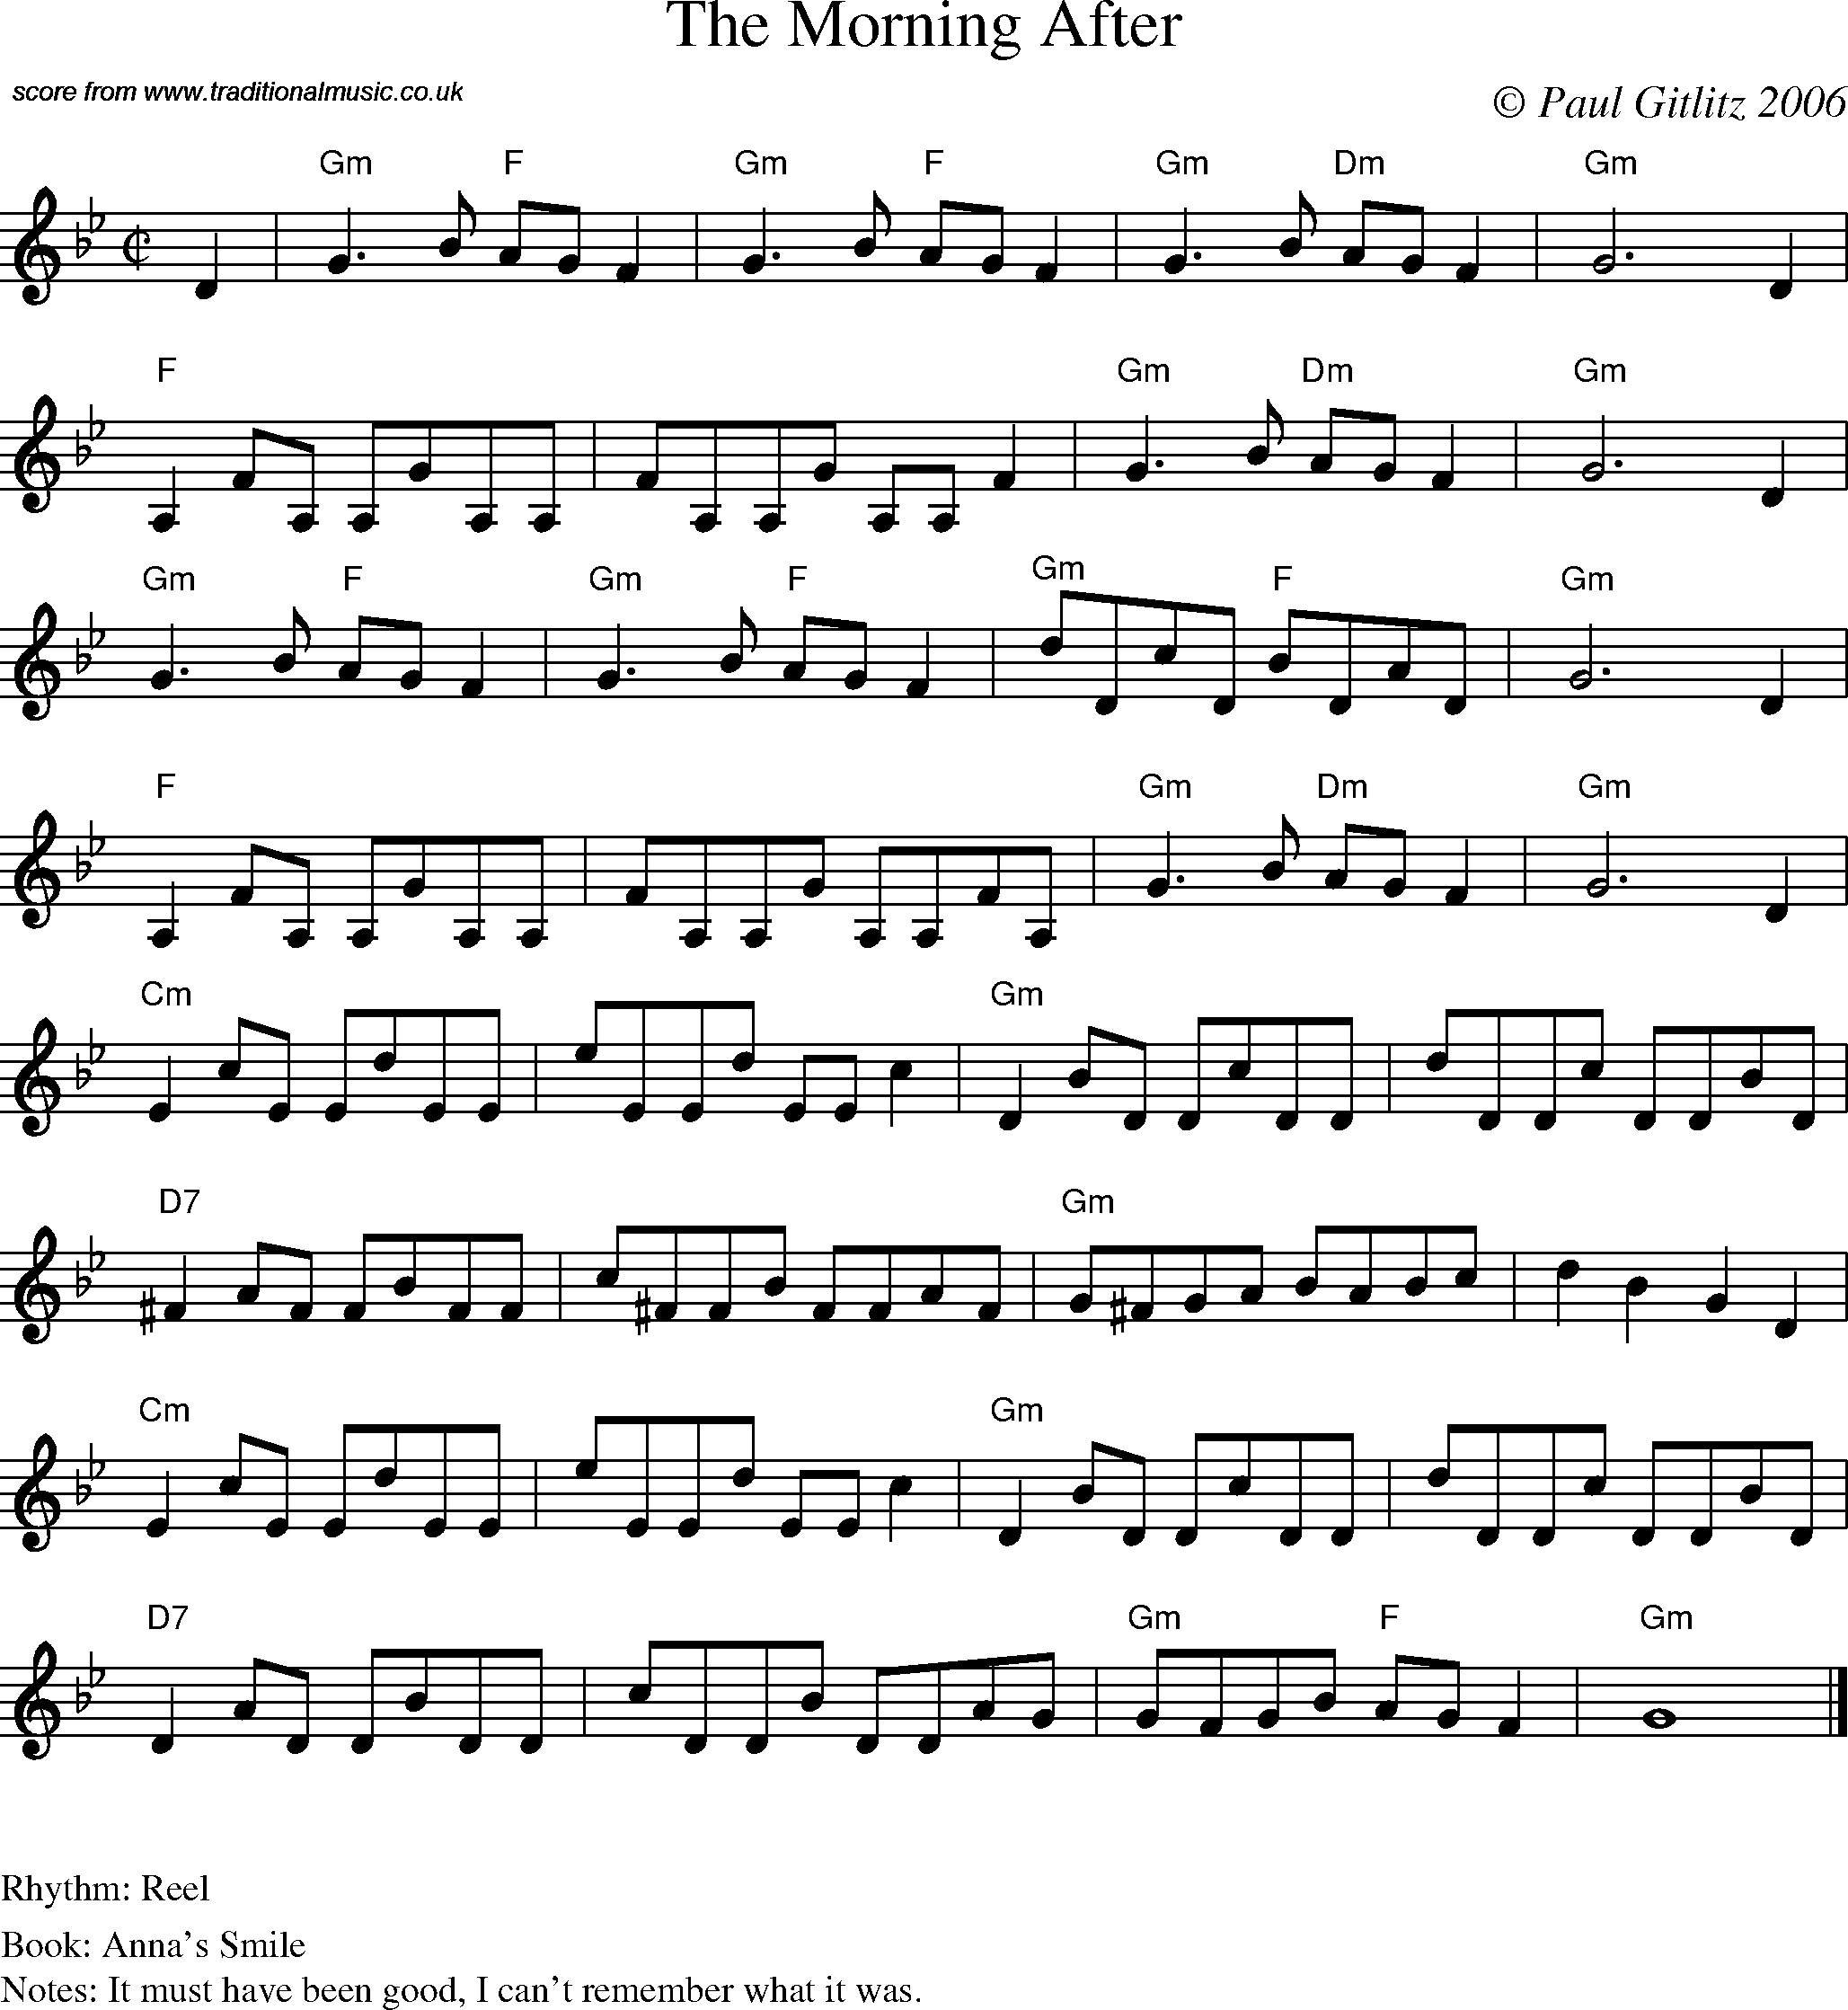 Sheet Music Score for Reel - The Morning After